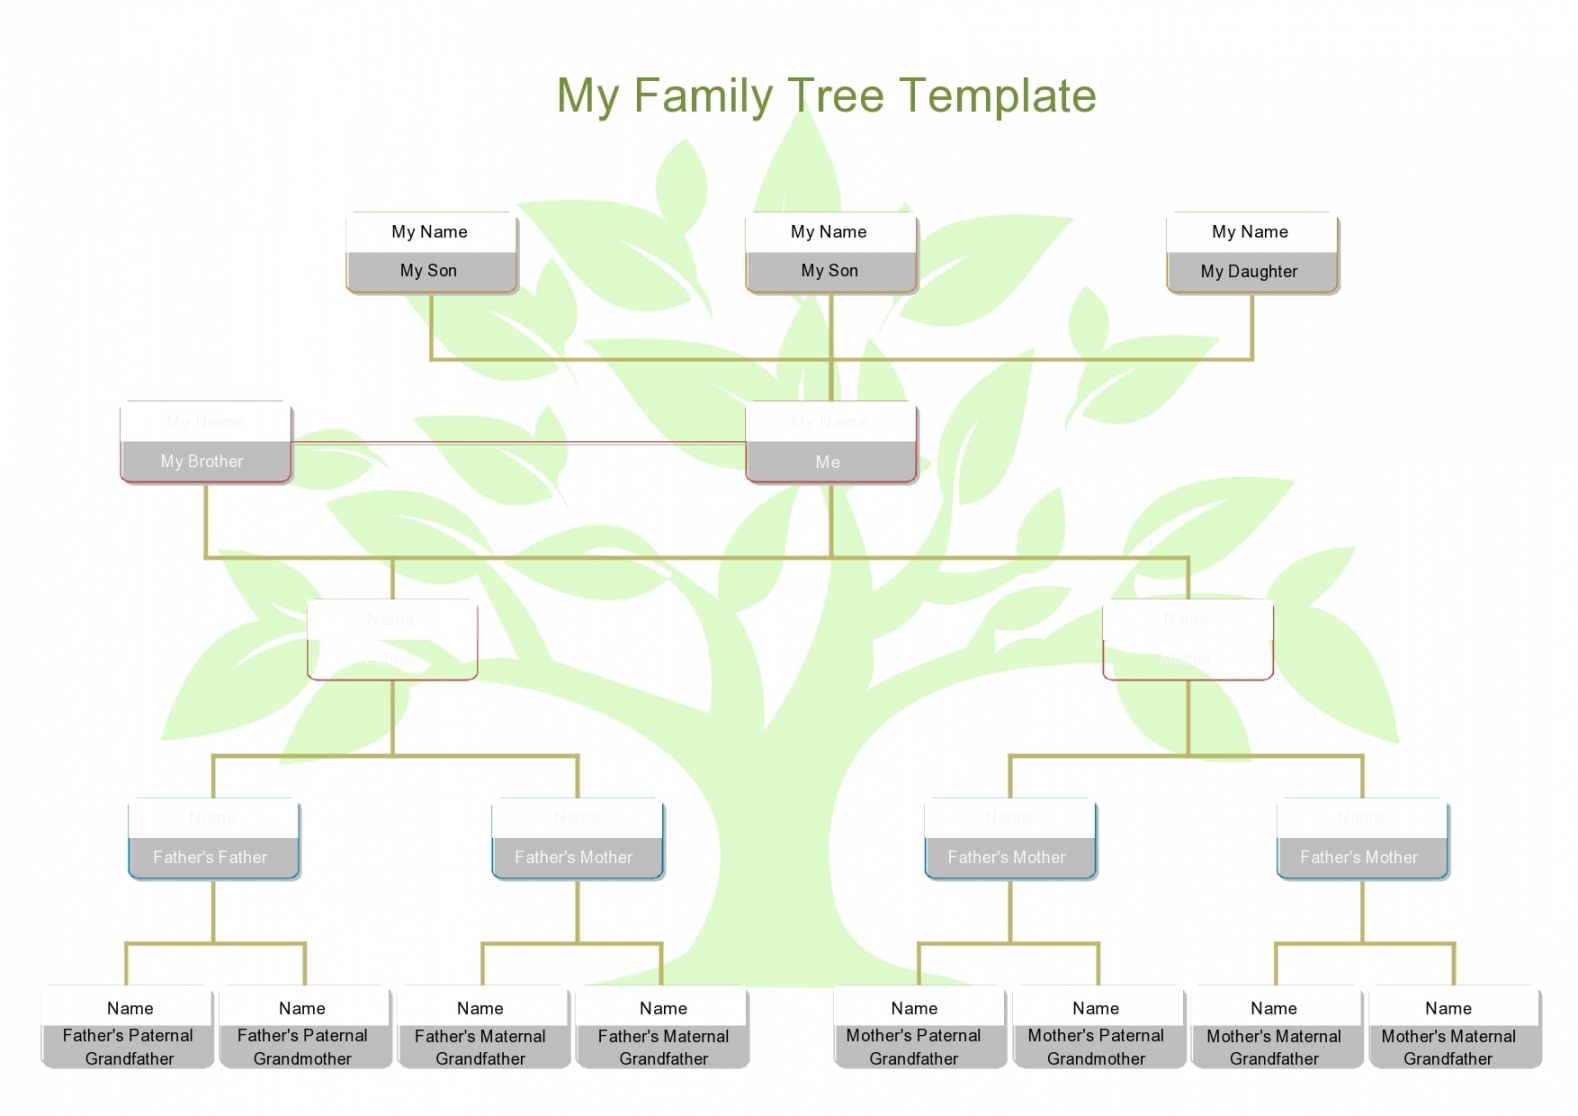 Editable Family Tree Templates [% Free] - TemplateArchive